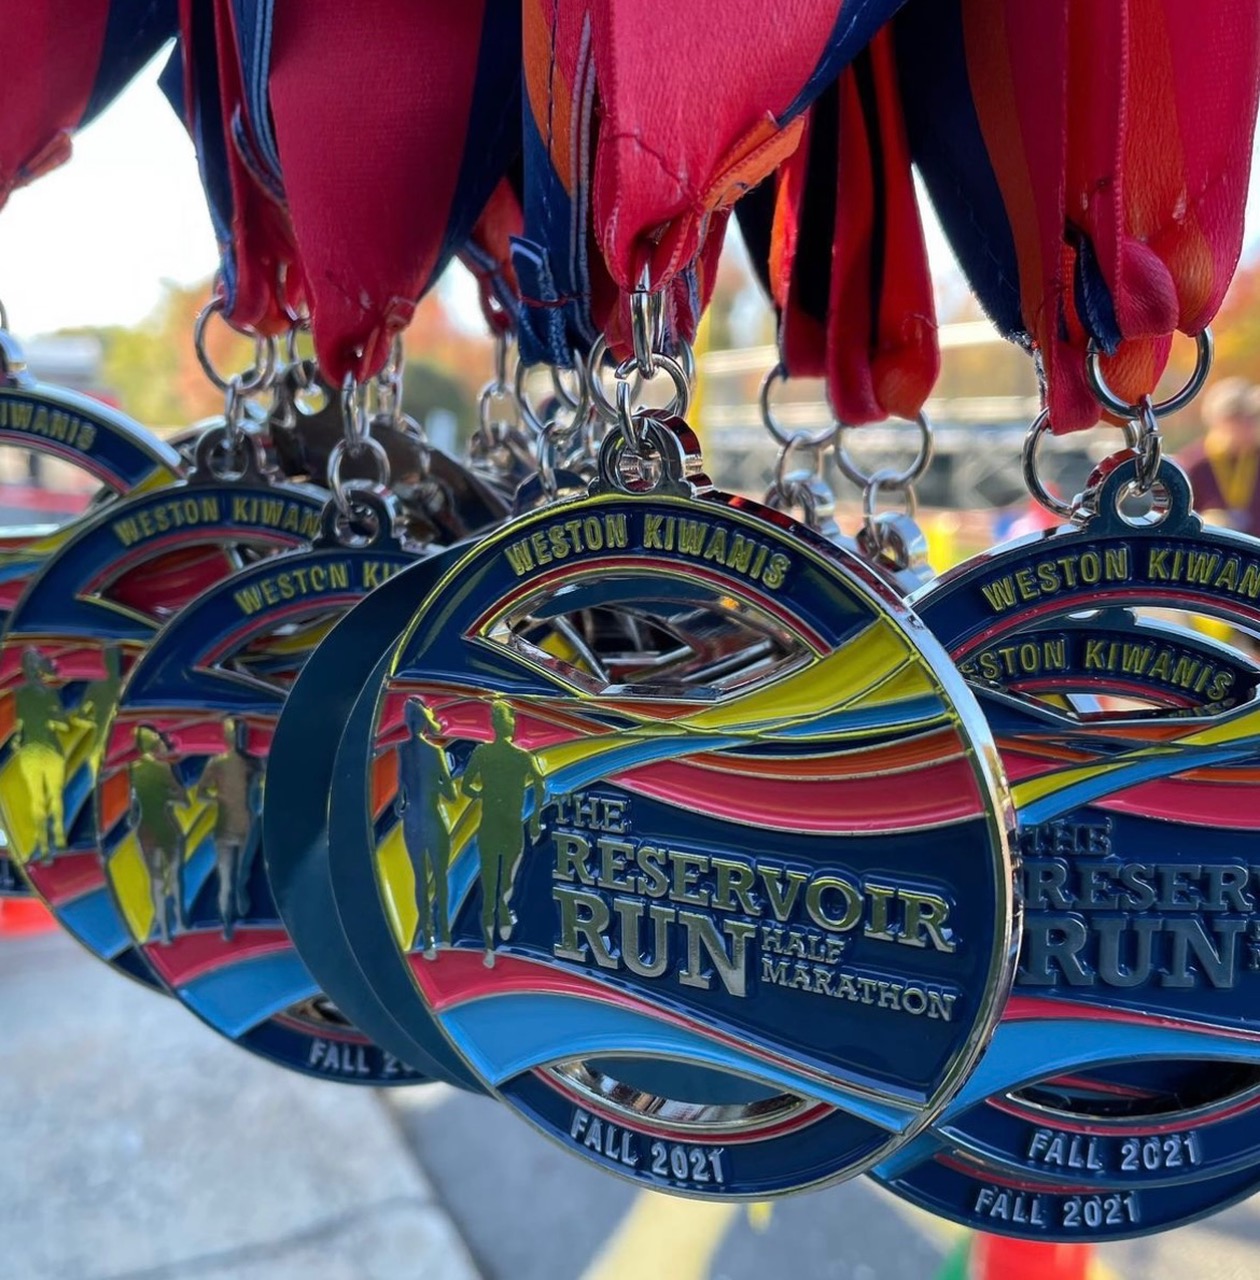 Medals from the Weston Reservoir Run